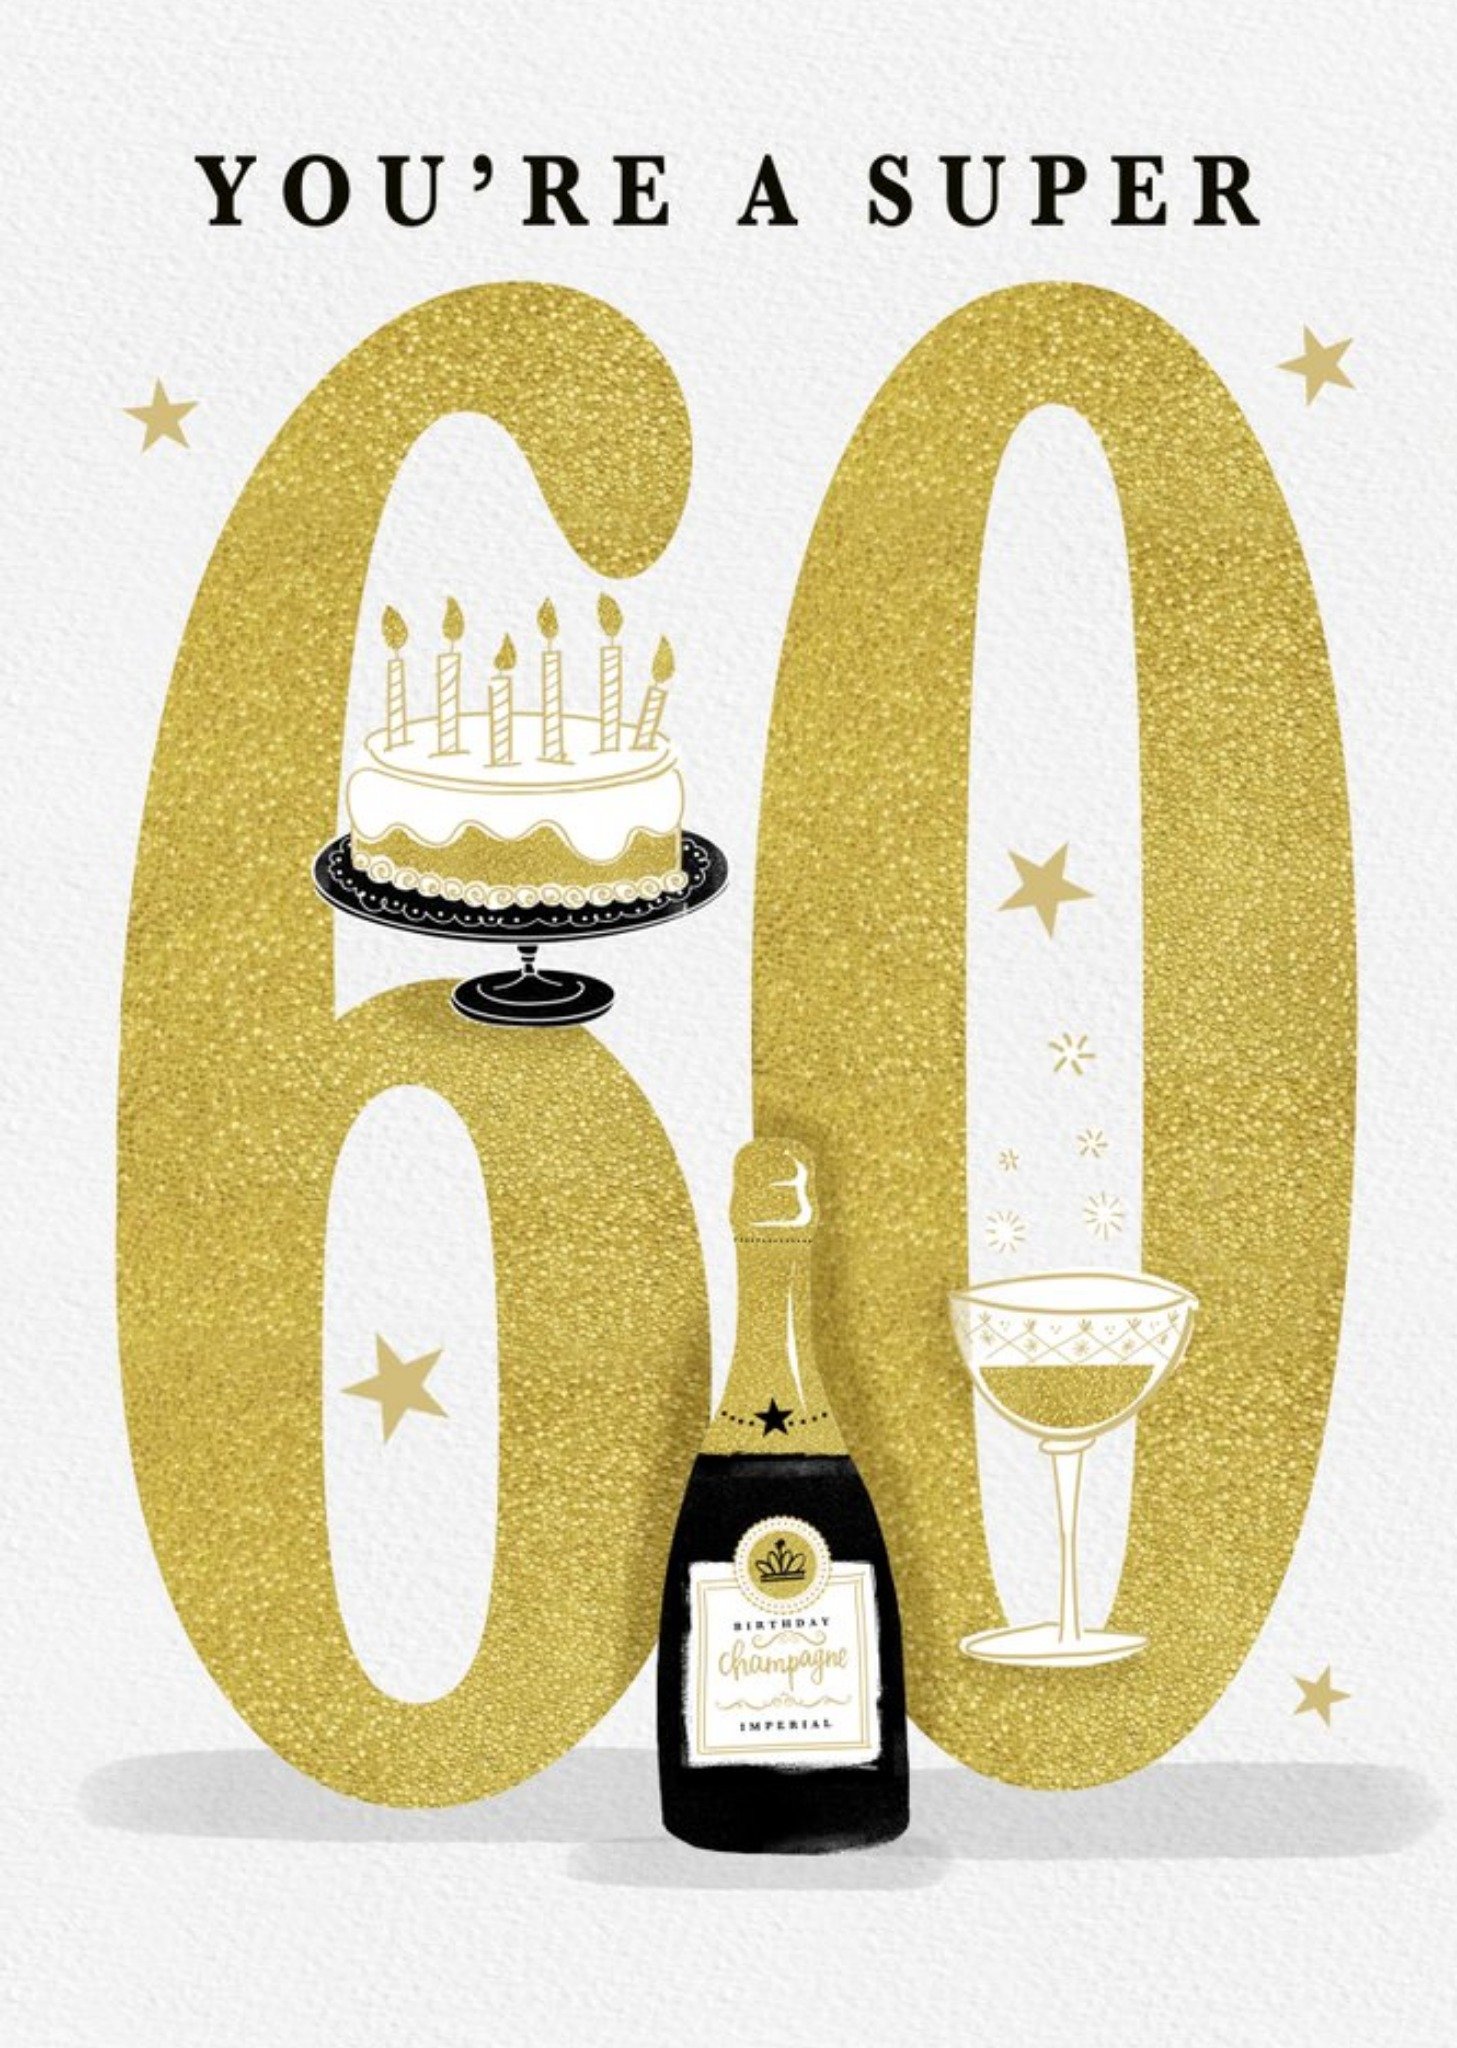 Moonpig Large Golden Number With Illustrations Of Cake And Wine 60th Birthday Card Ecard